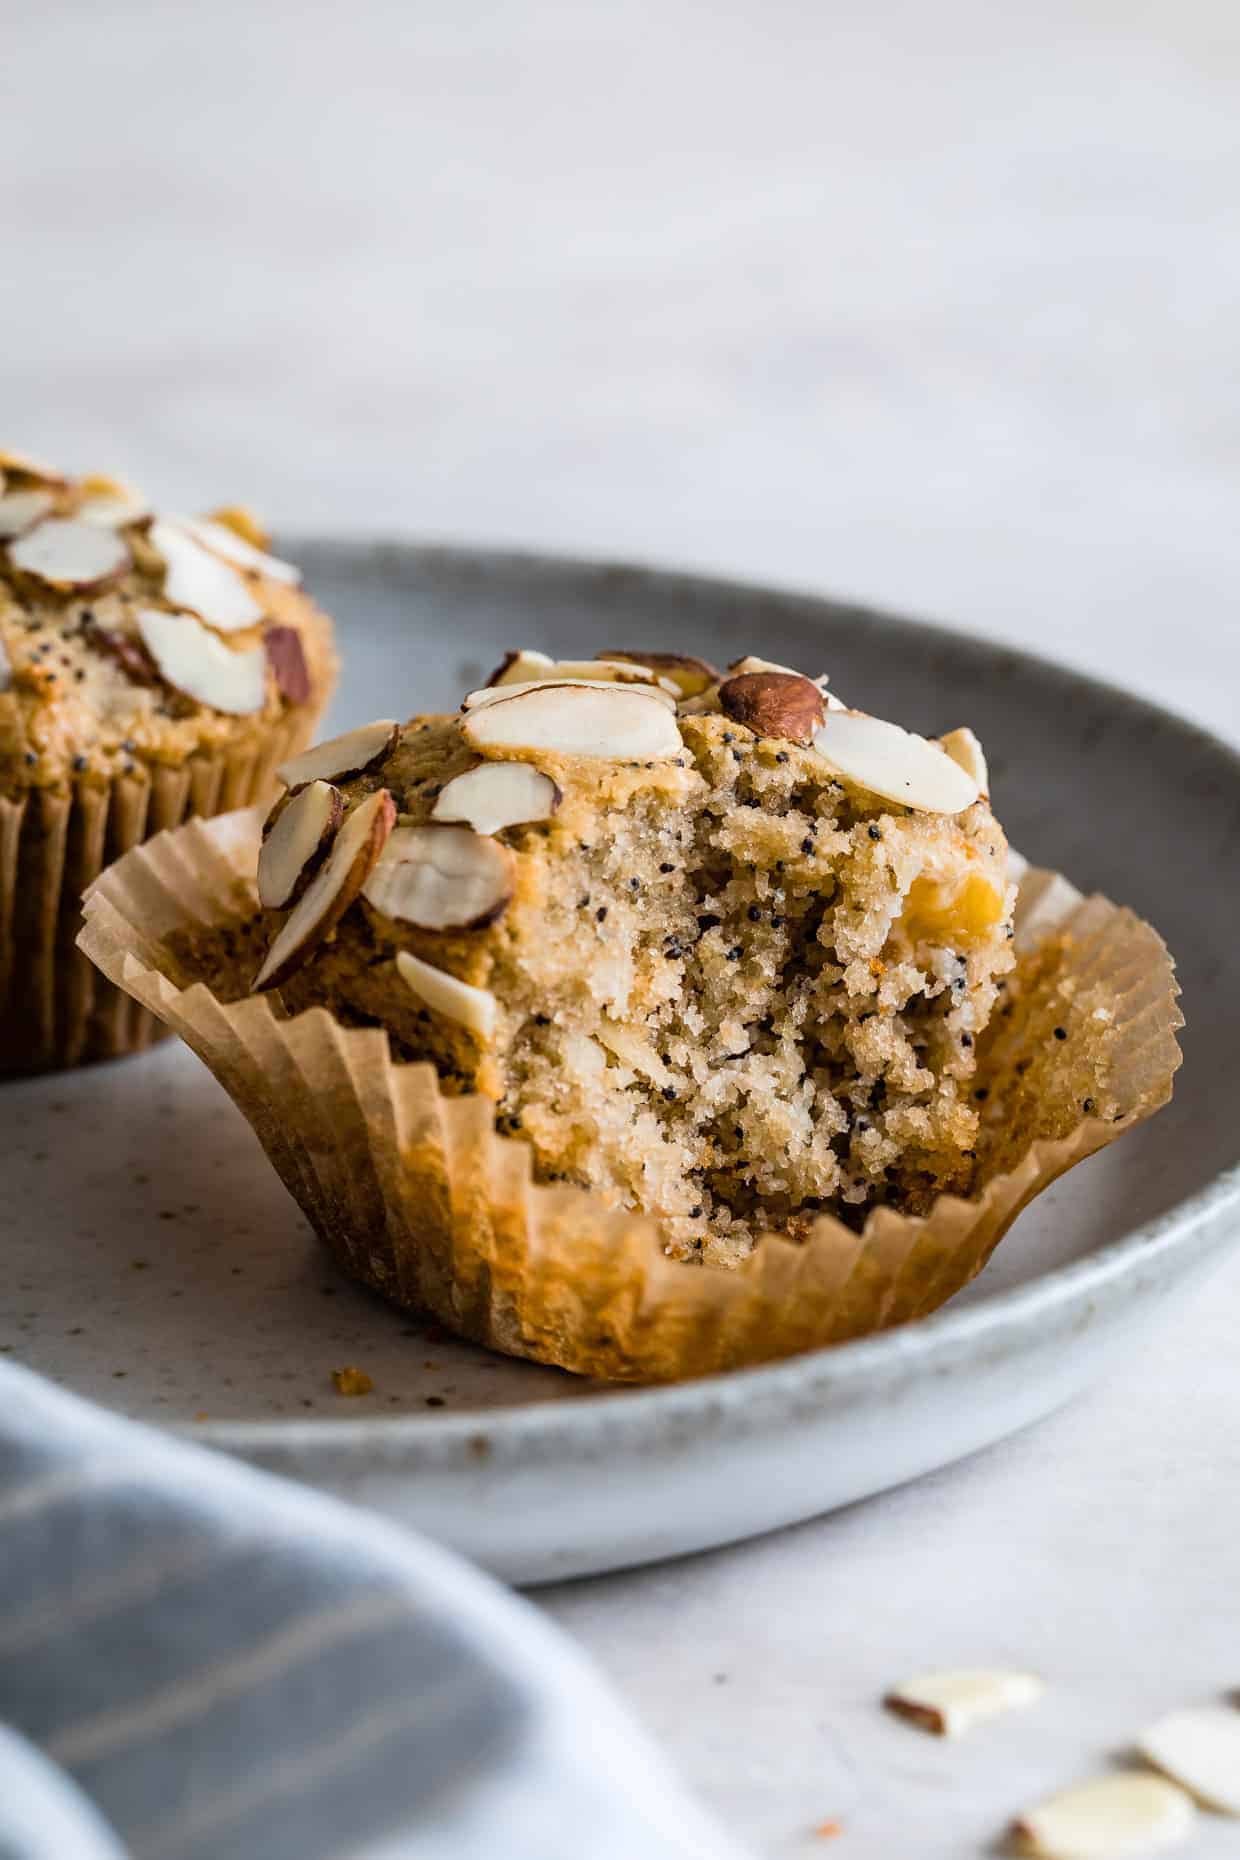 Poppy Seed Almond Muffins with Peaches